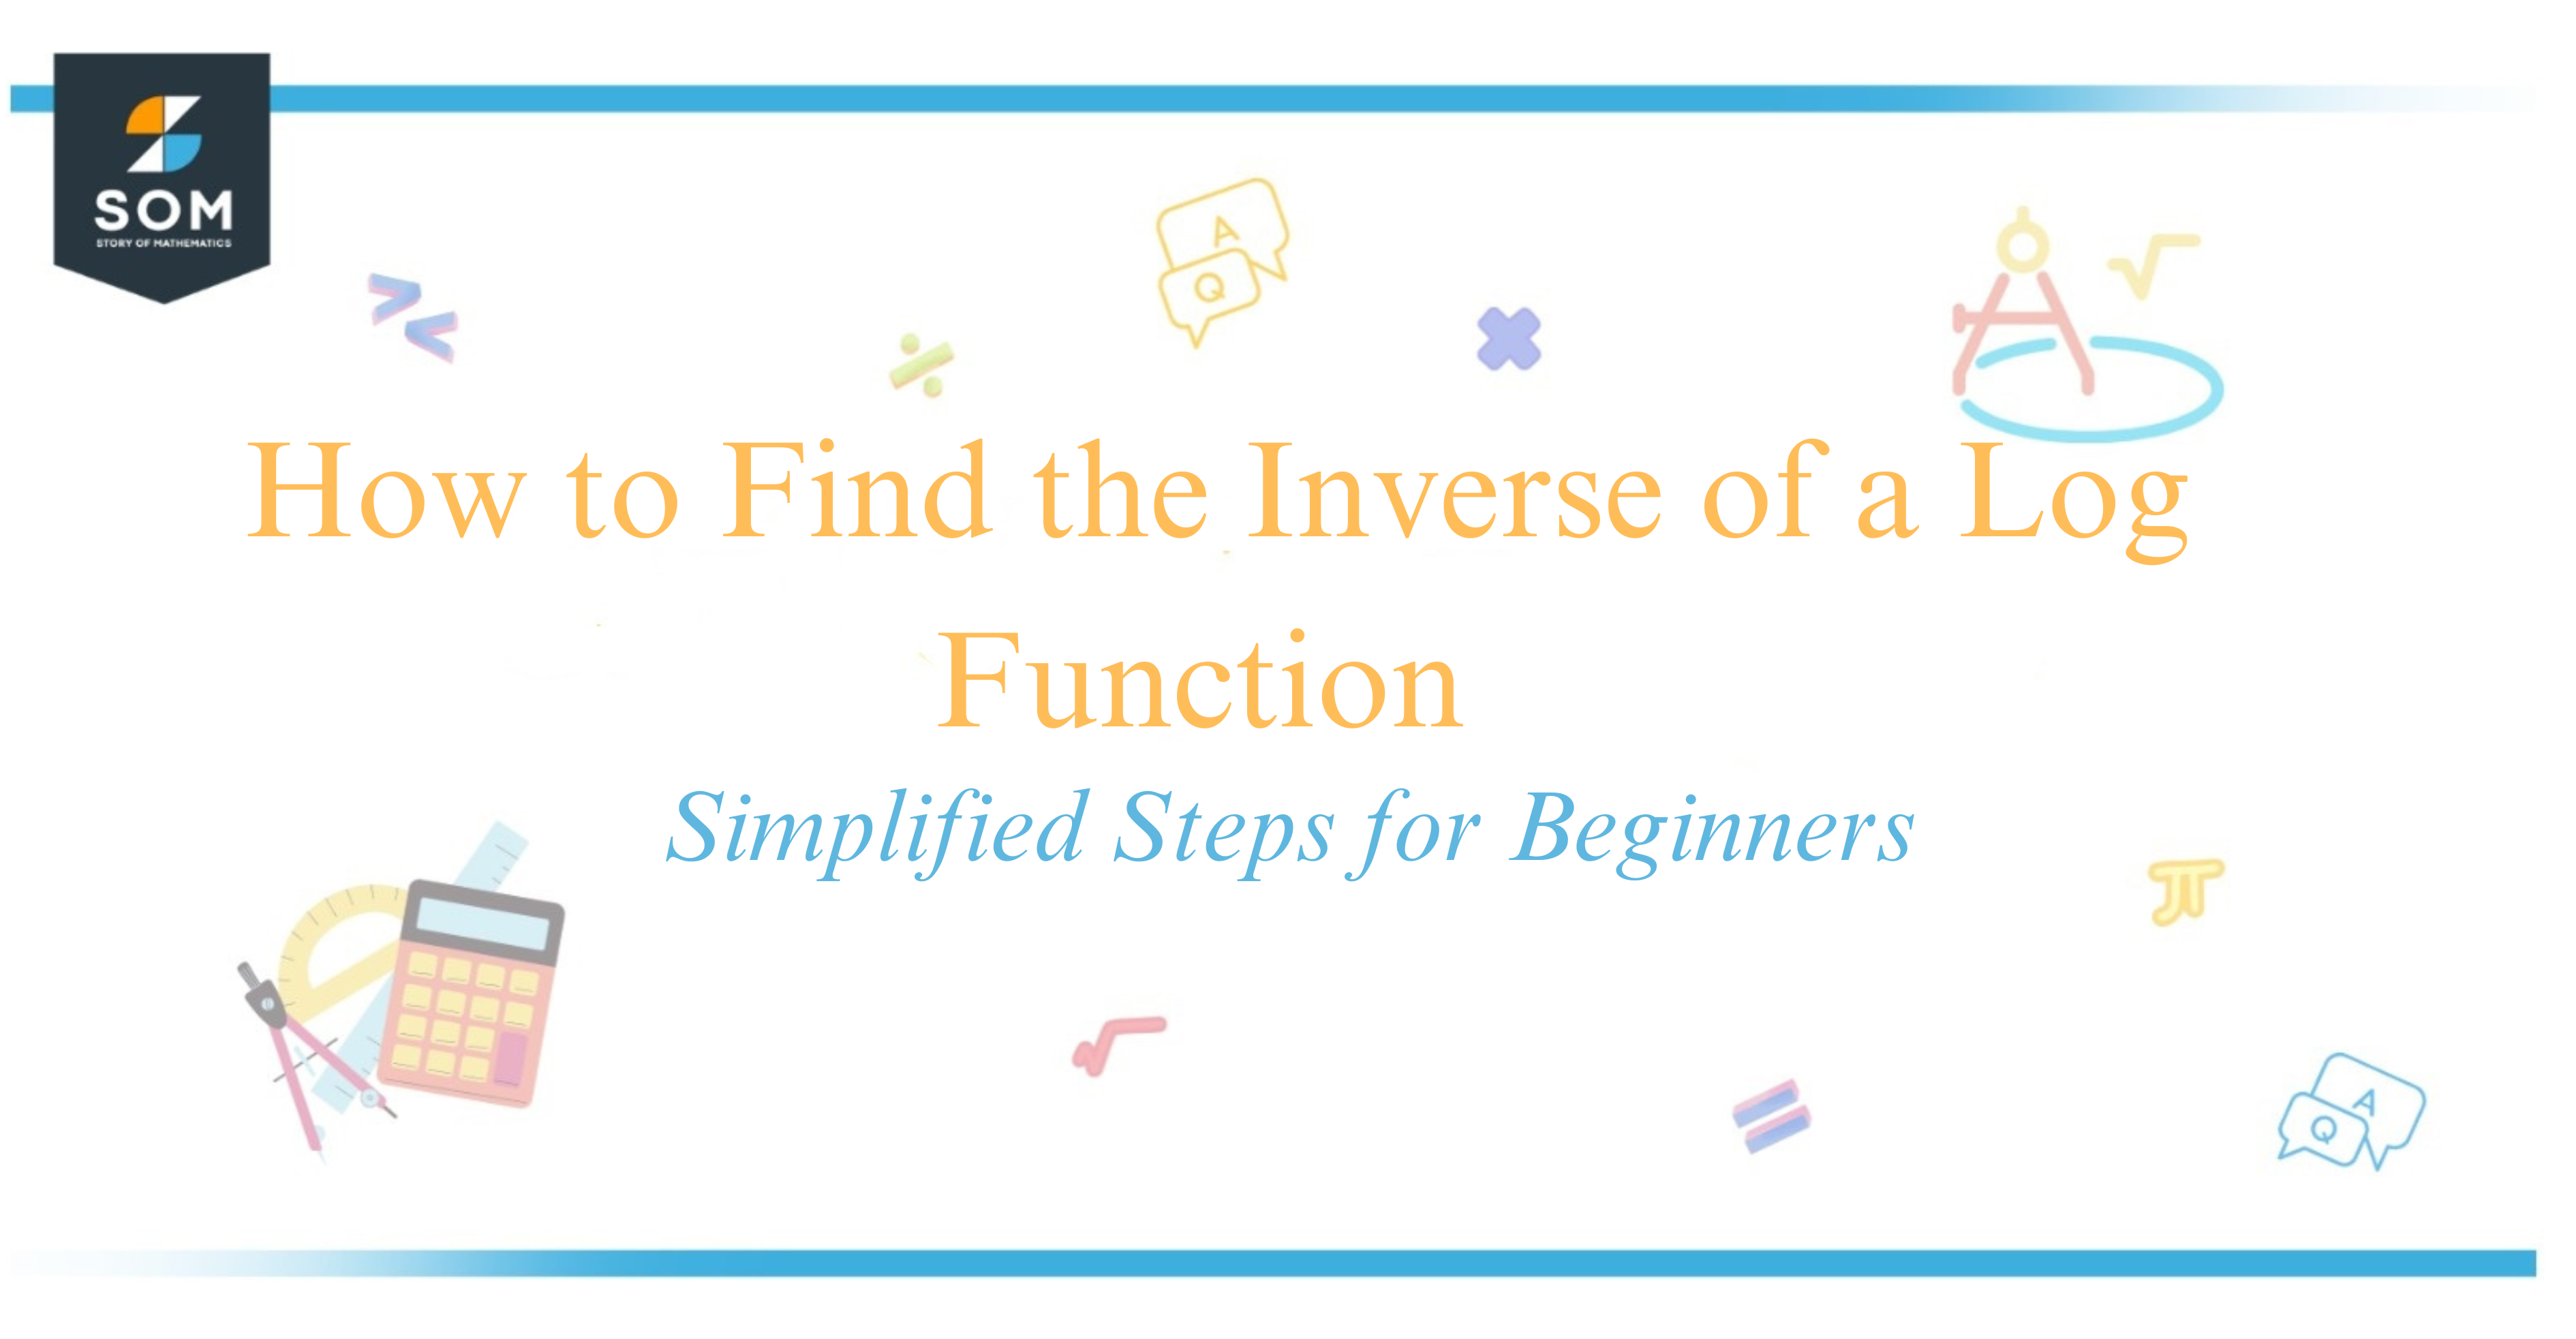 How to Find the Inverse of a Log Function Simplified Steps for Beginners